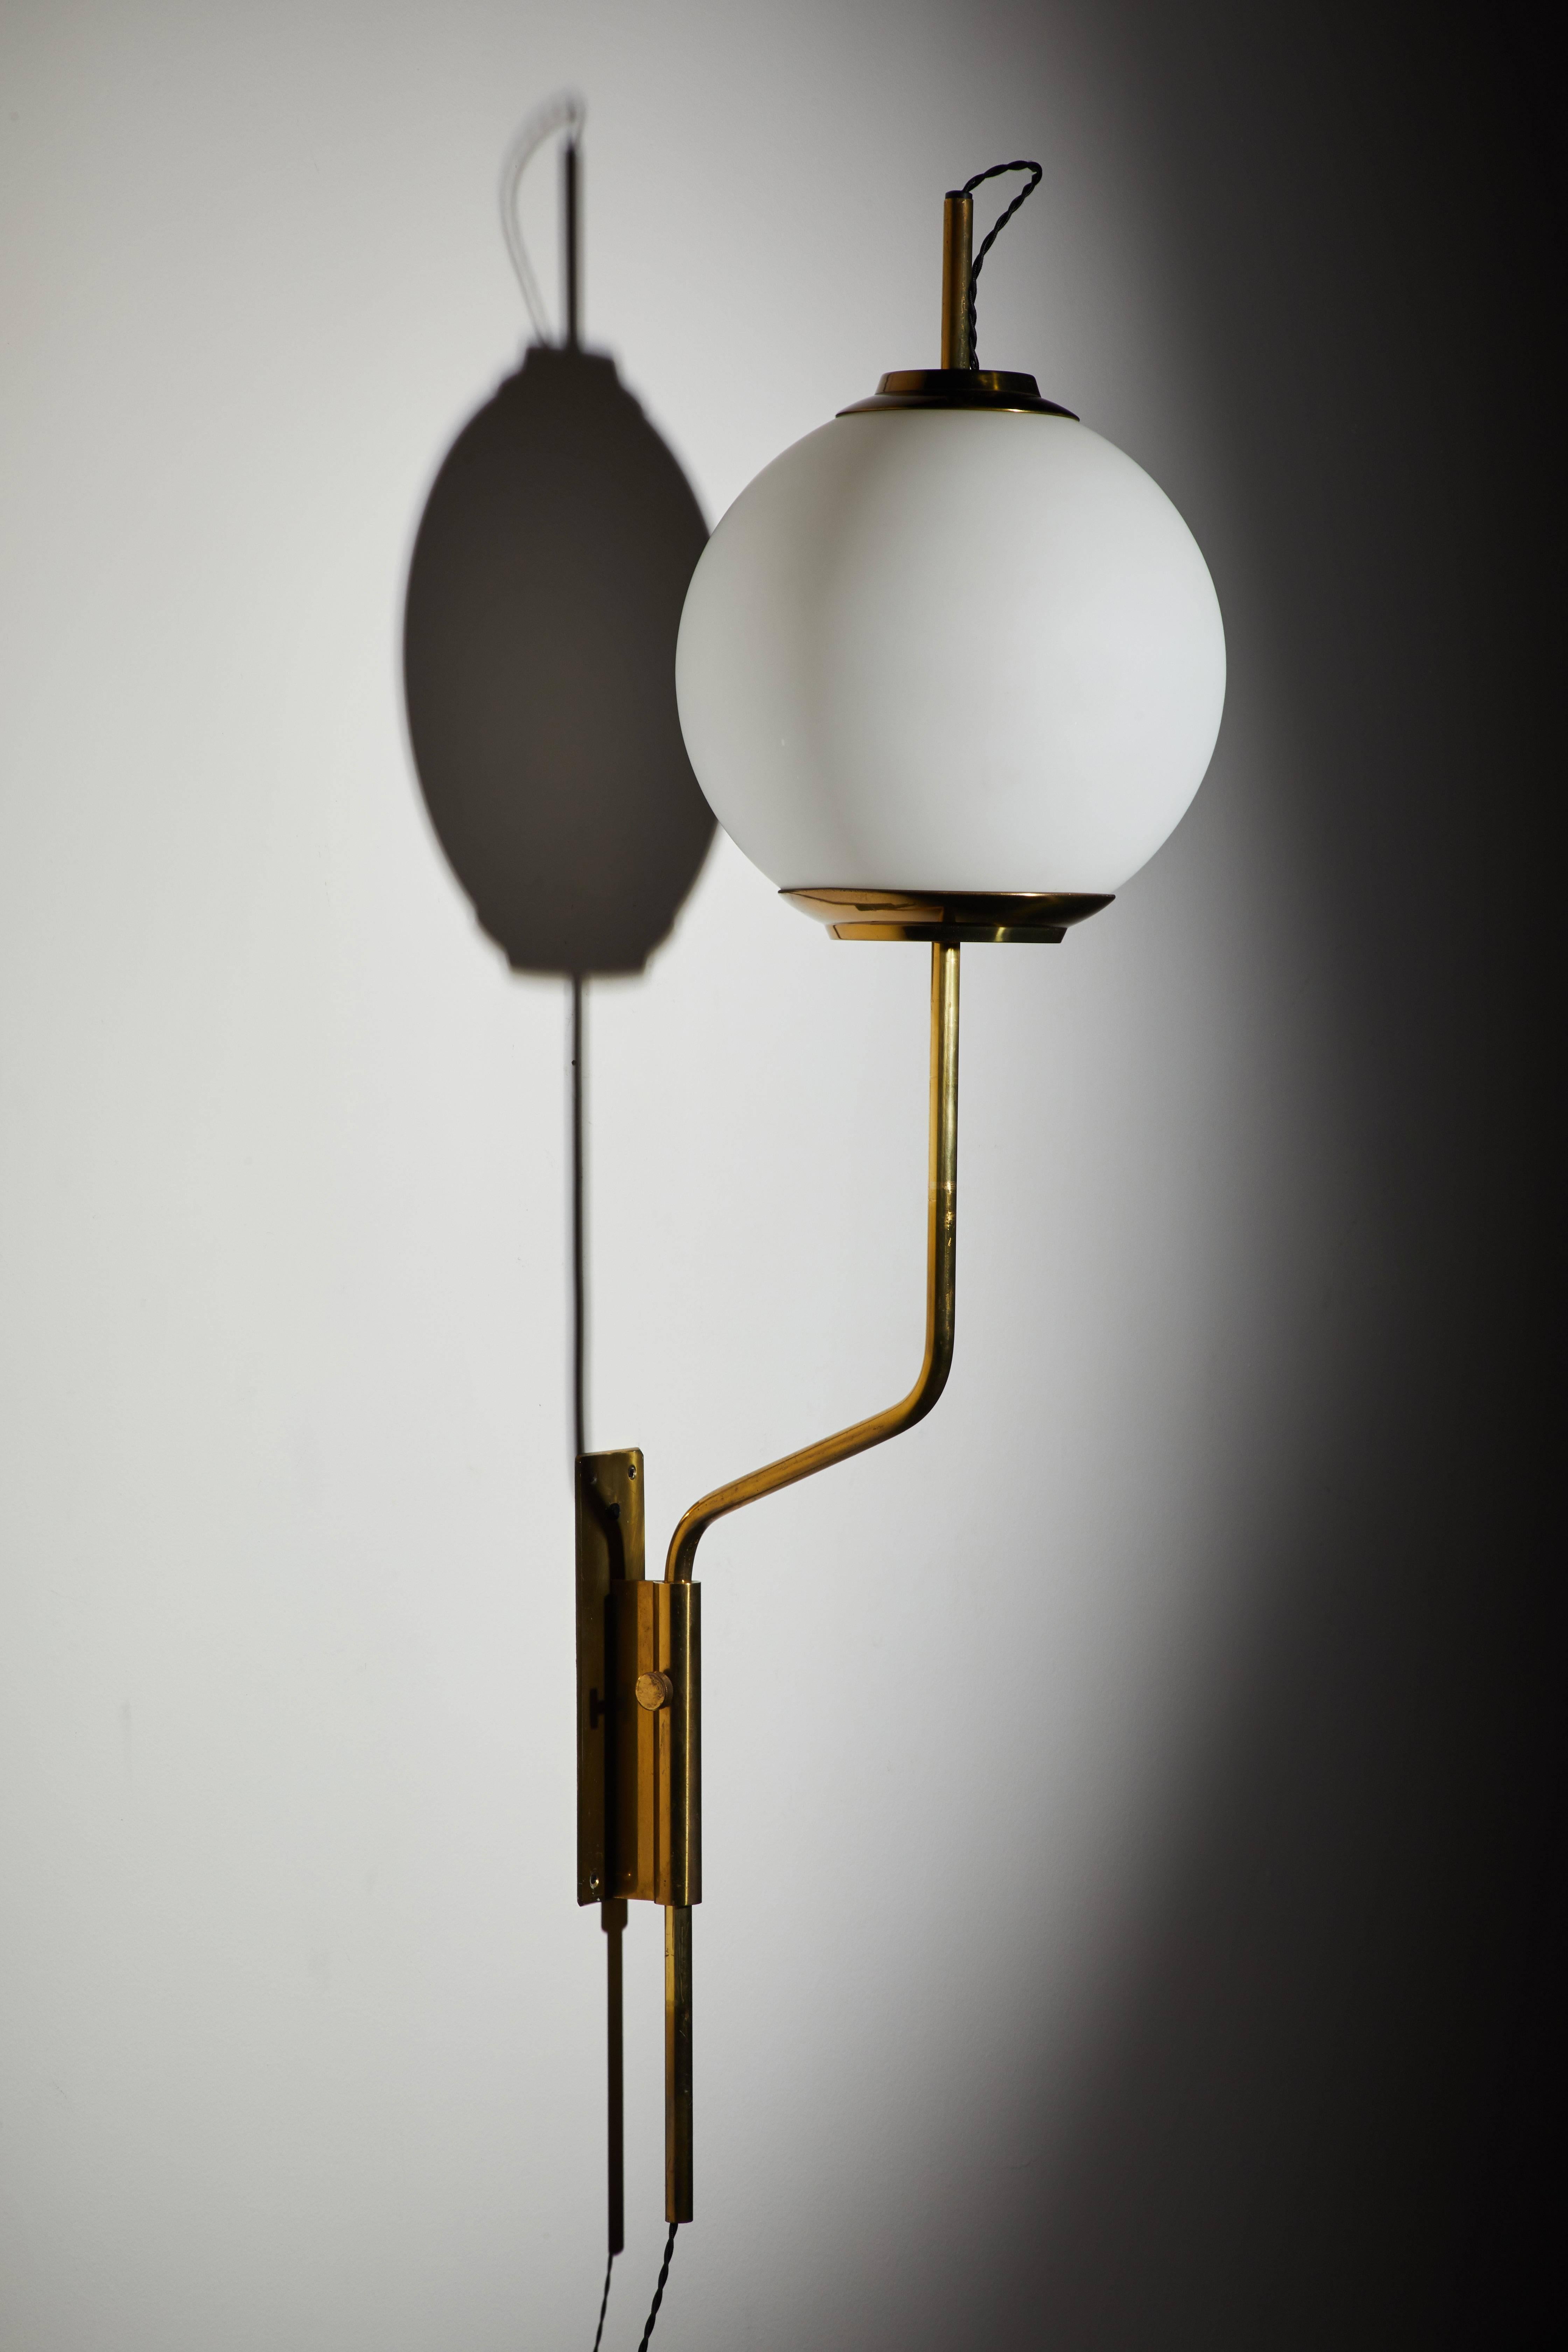 Mid-Century Modern Pair of Model Lp11 Pallone Wall Lights by Luigi Caccia Dominioni for Azucena